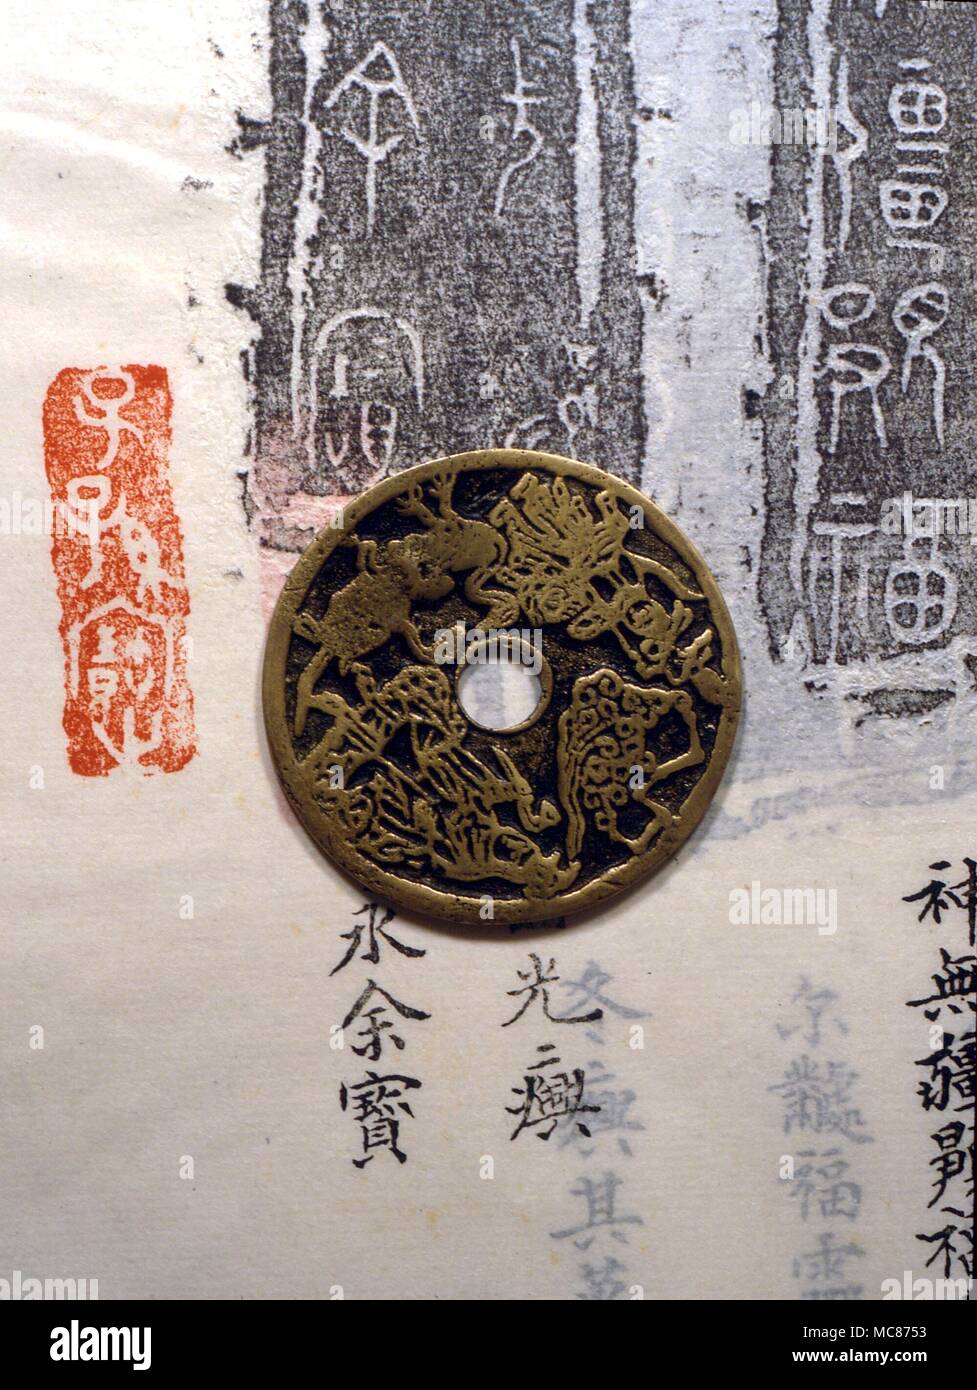 Taoism. Early pictographic writing of the Chinese, from bronze urns approximately contemporaneous with LaoTsze, the Master of Taoist literature. The medal portrays the four directions of the Chinese cosmology, rooted in the dualism of Yin and Yang Stock Photo